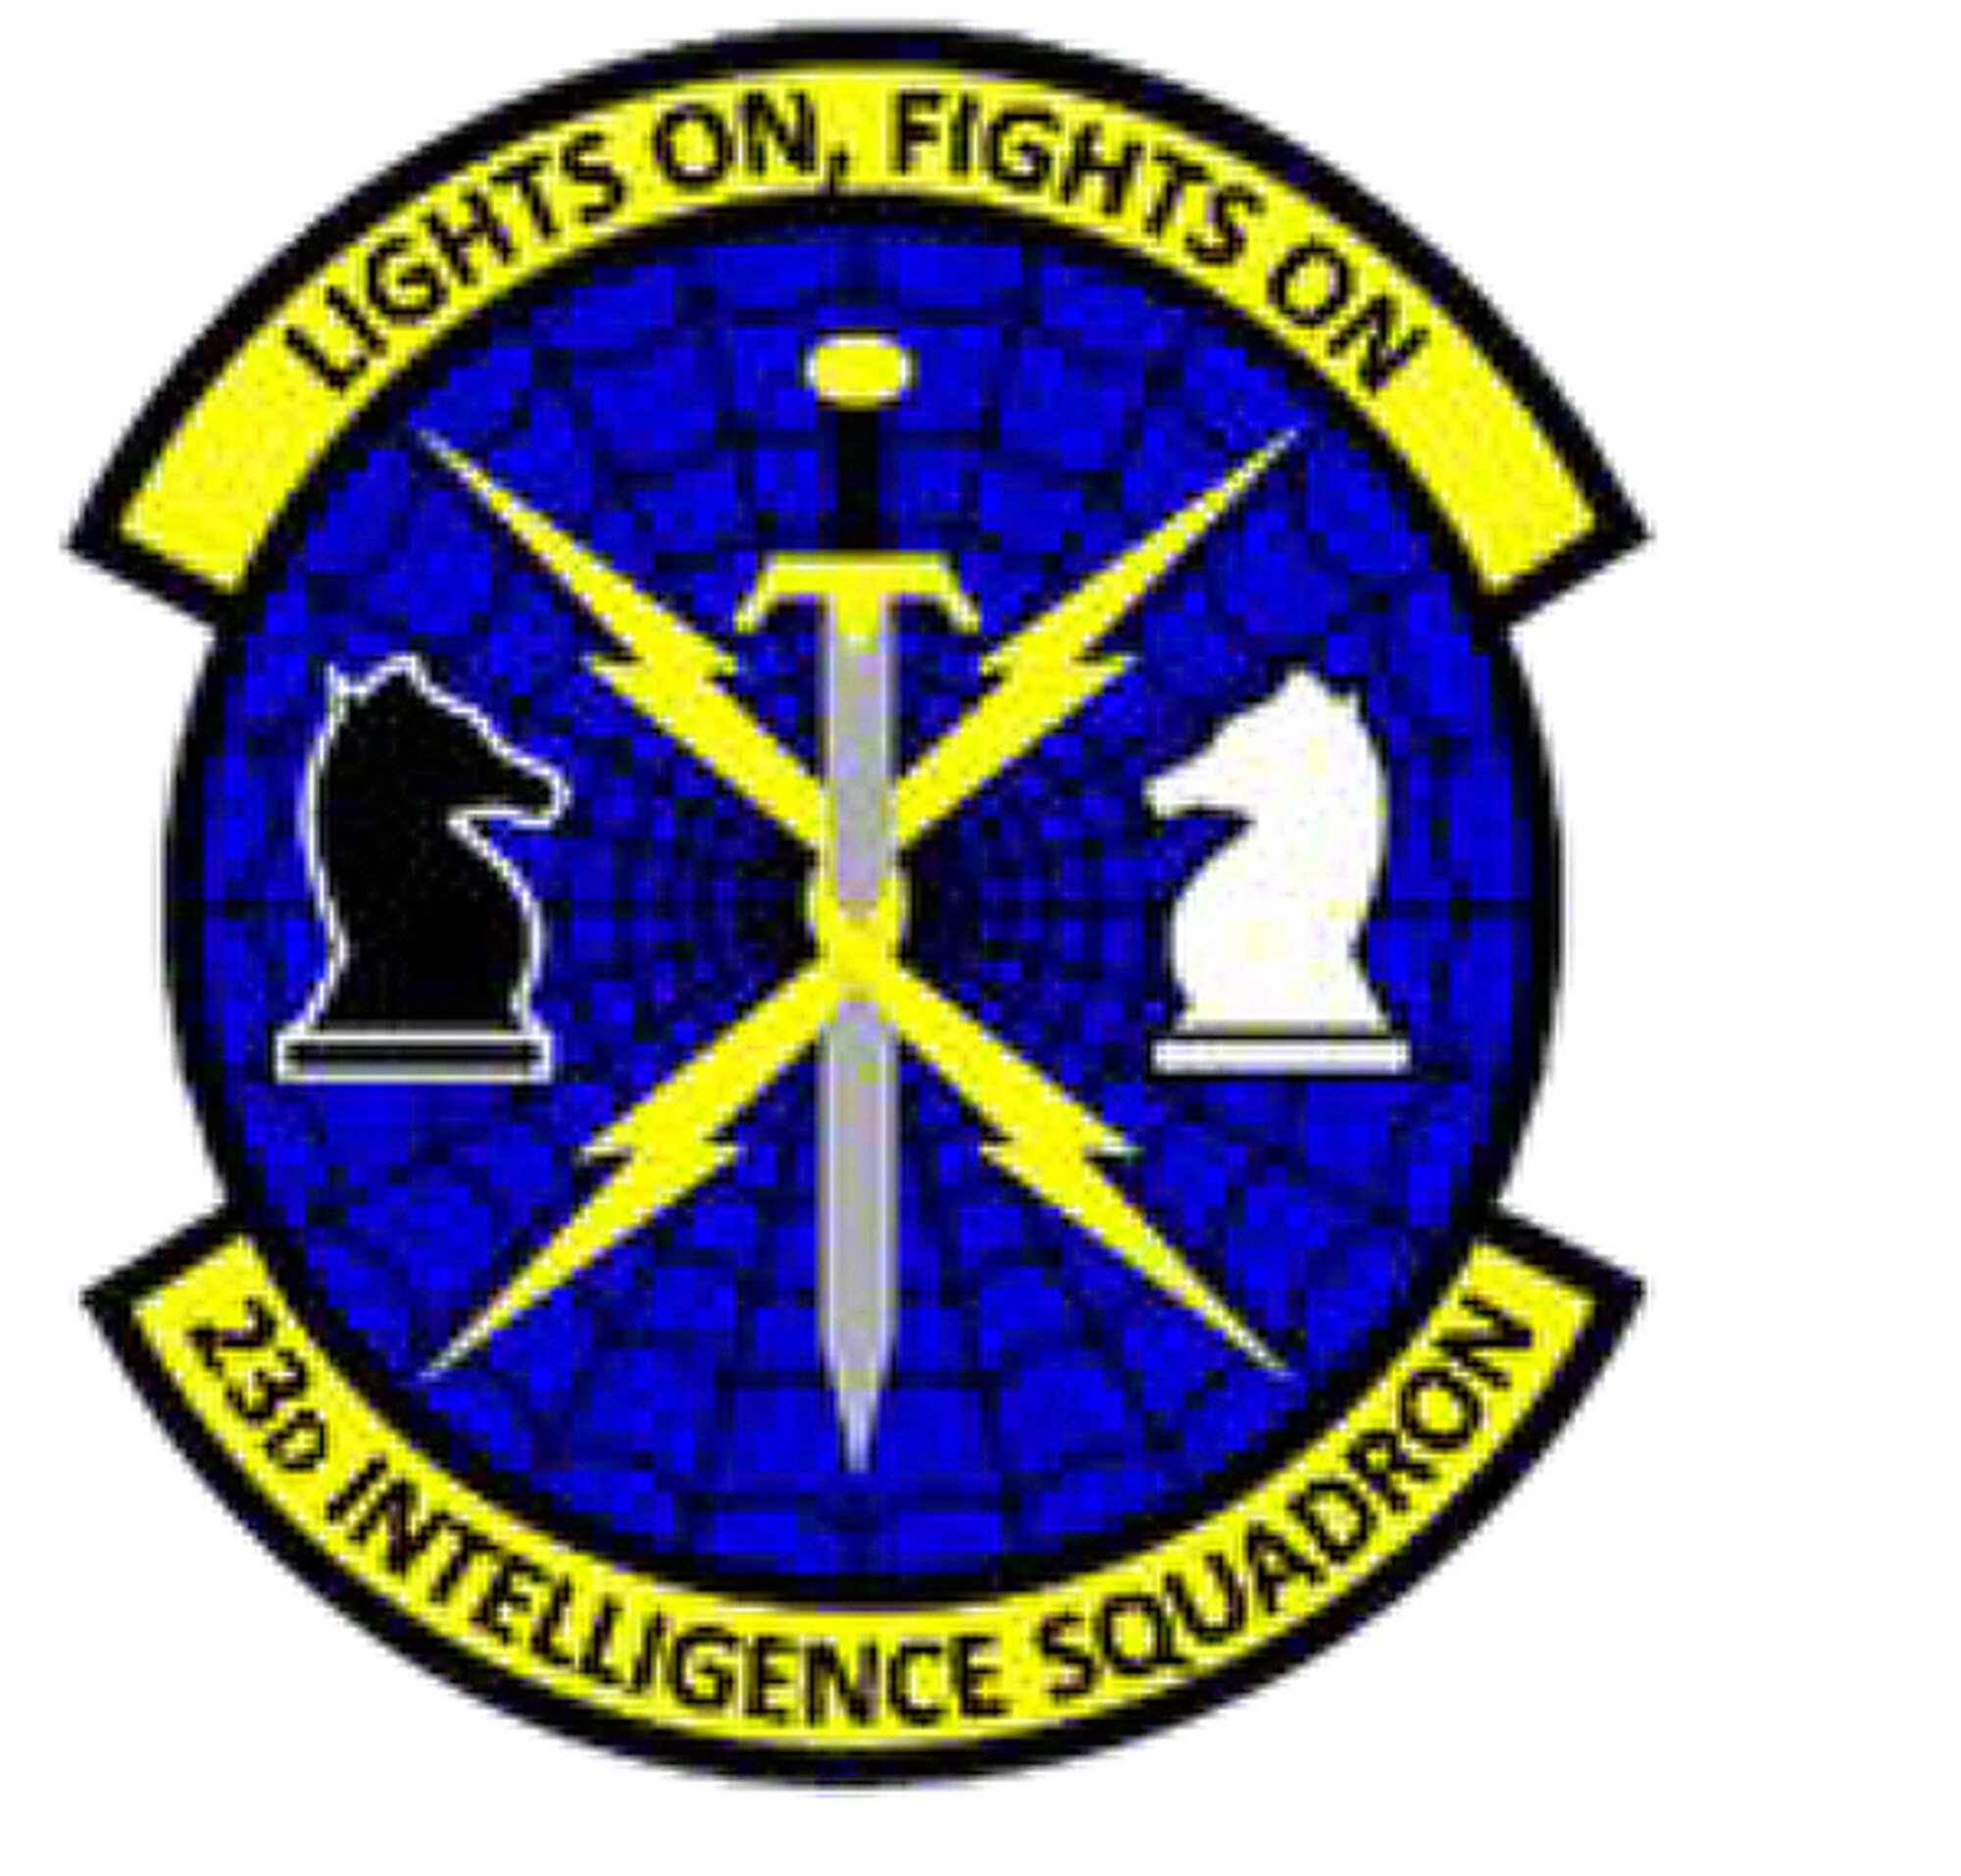 The Airmen of the 23rd Intelligence Squadron continue to excel in the midst of challenges, and closed out the last quarter of 2020 on a high note.